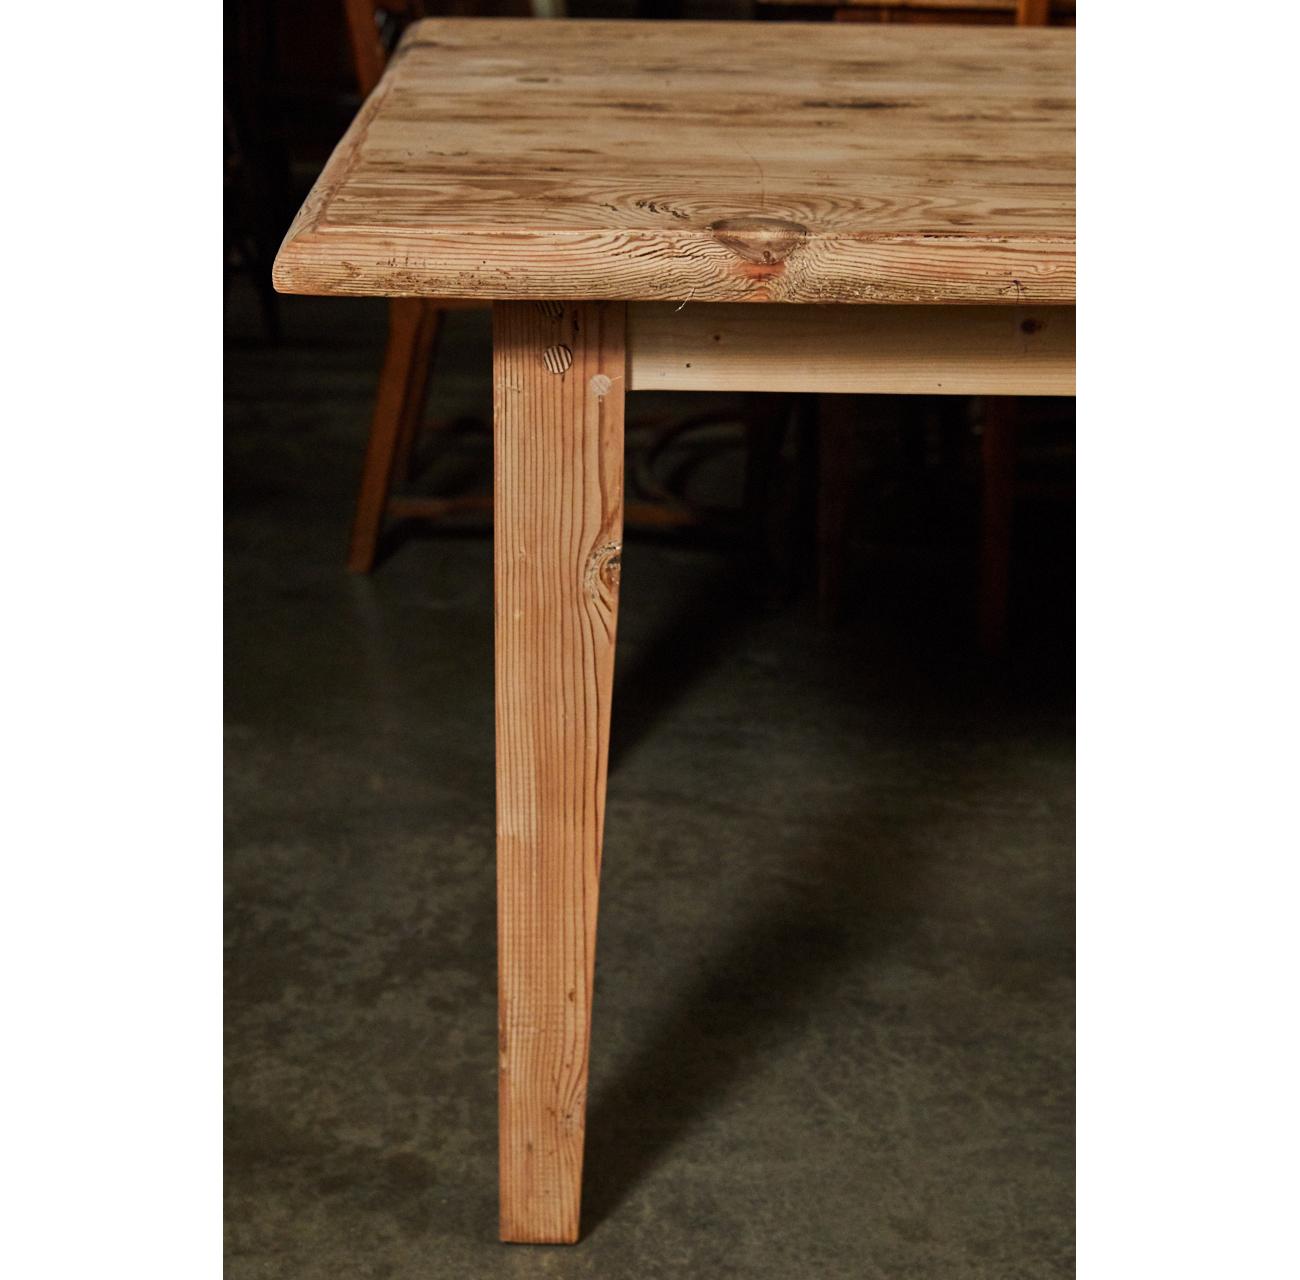 This large pine table is a great size for a large dining room. It has nicely tapered legs and a simple skirt. This table has a rustic, raw finish which can be changed to a waxed finish to suit a buyers needs.
 